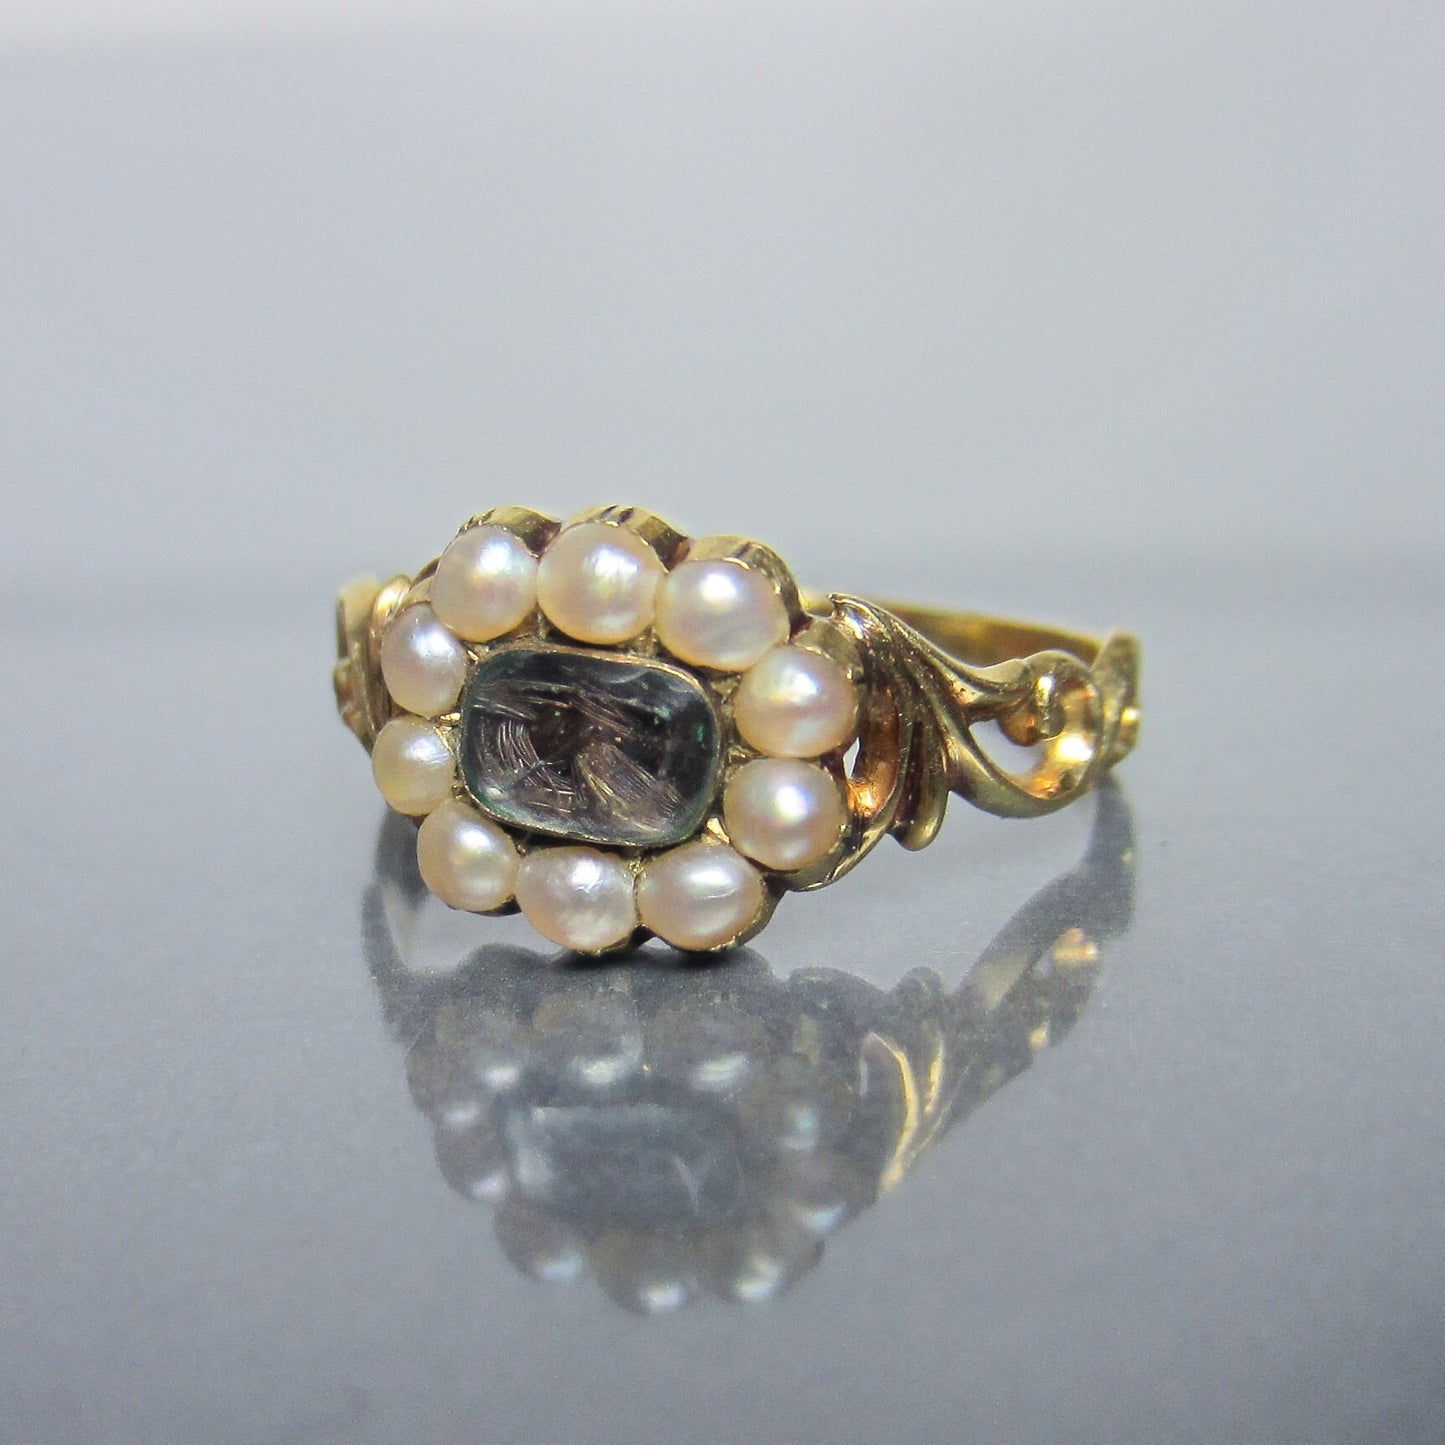 SOLD--Early Victorian Mourning Ring 18k c. 1851